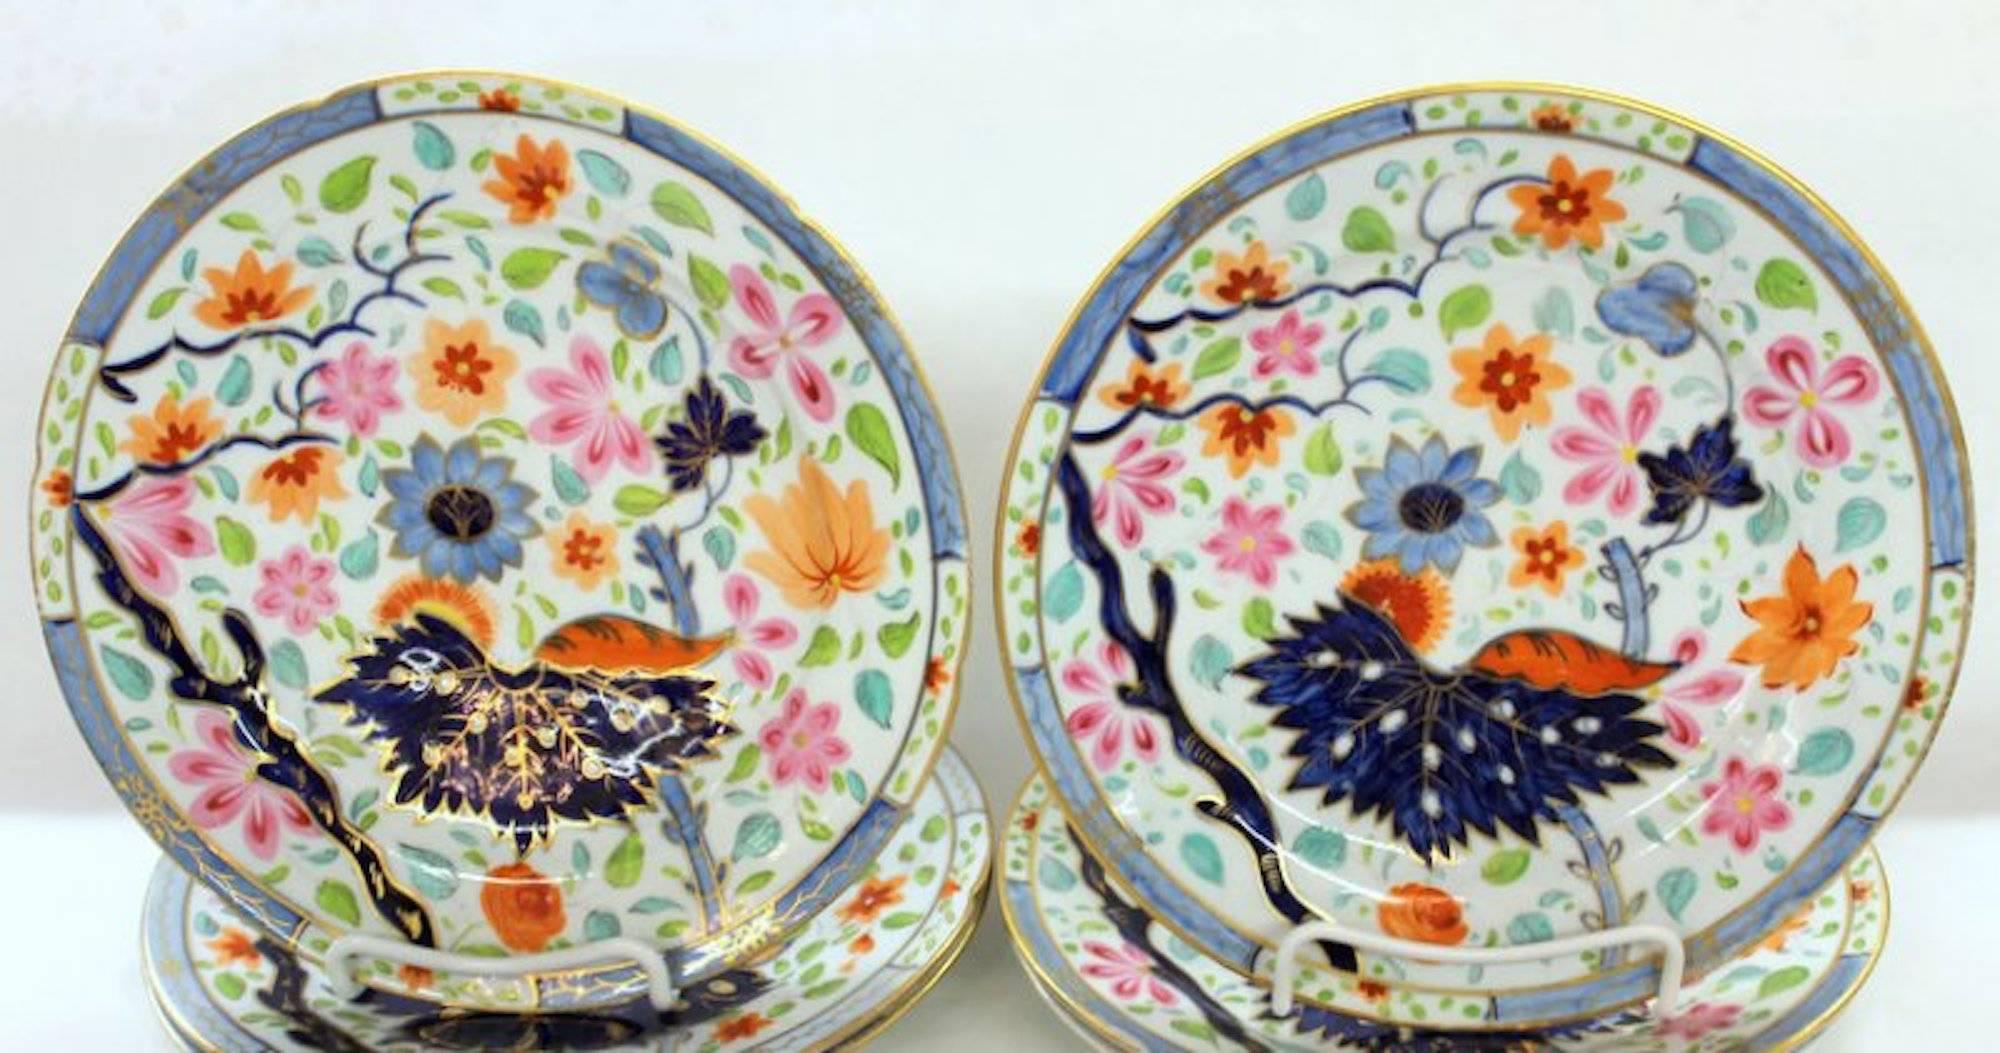 Set of four exceptional antique English hand-painted porcelain luncheon/dessert plates in the banana leaf pattern with superbly hand-painted flowers and leaves overall.

Attributed to Coalport (One plate very lightly crazed).
 